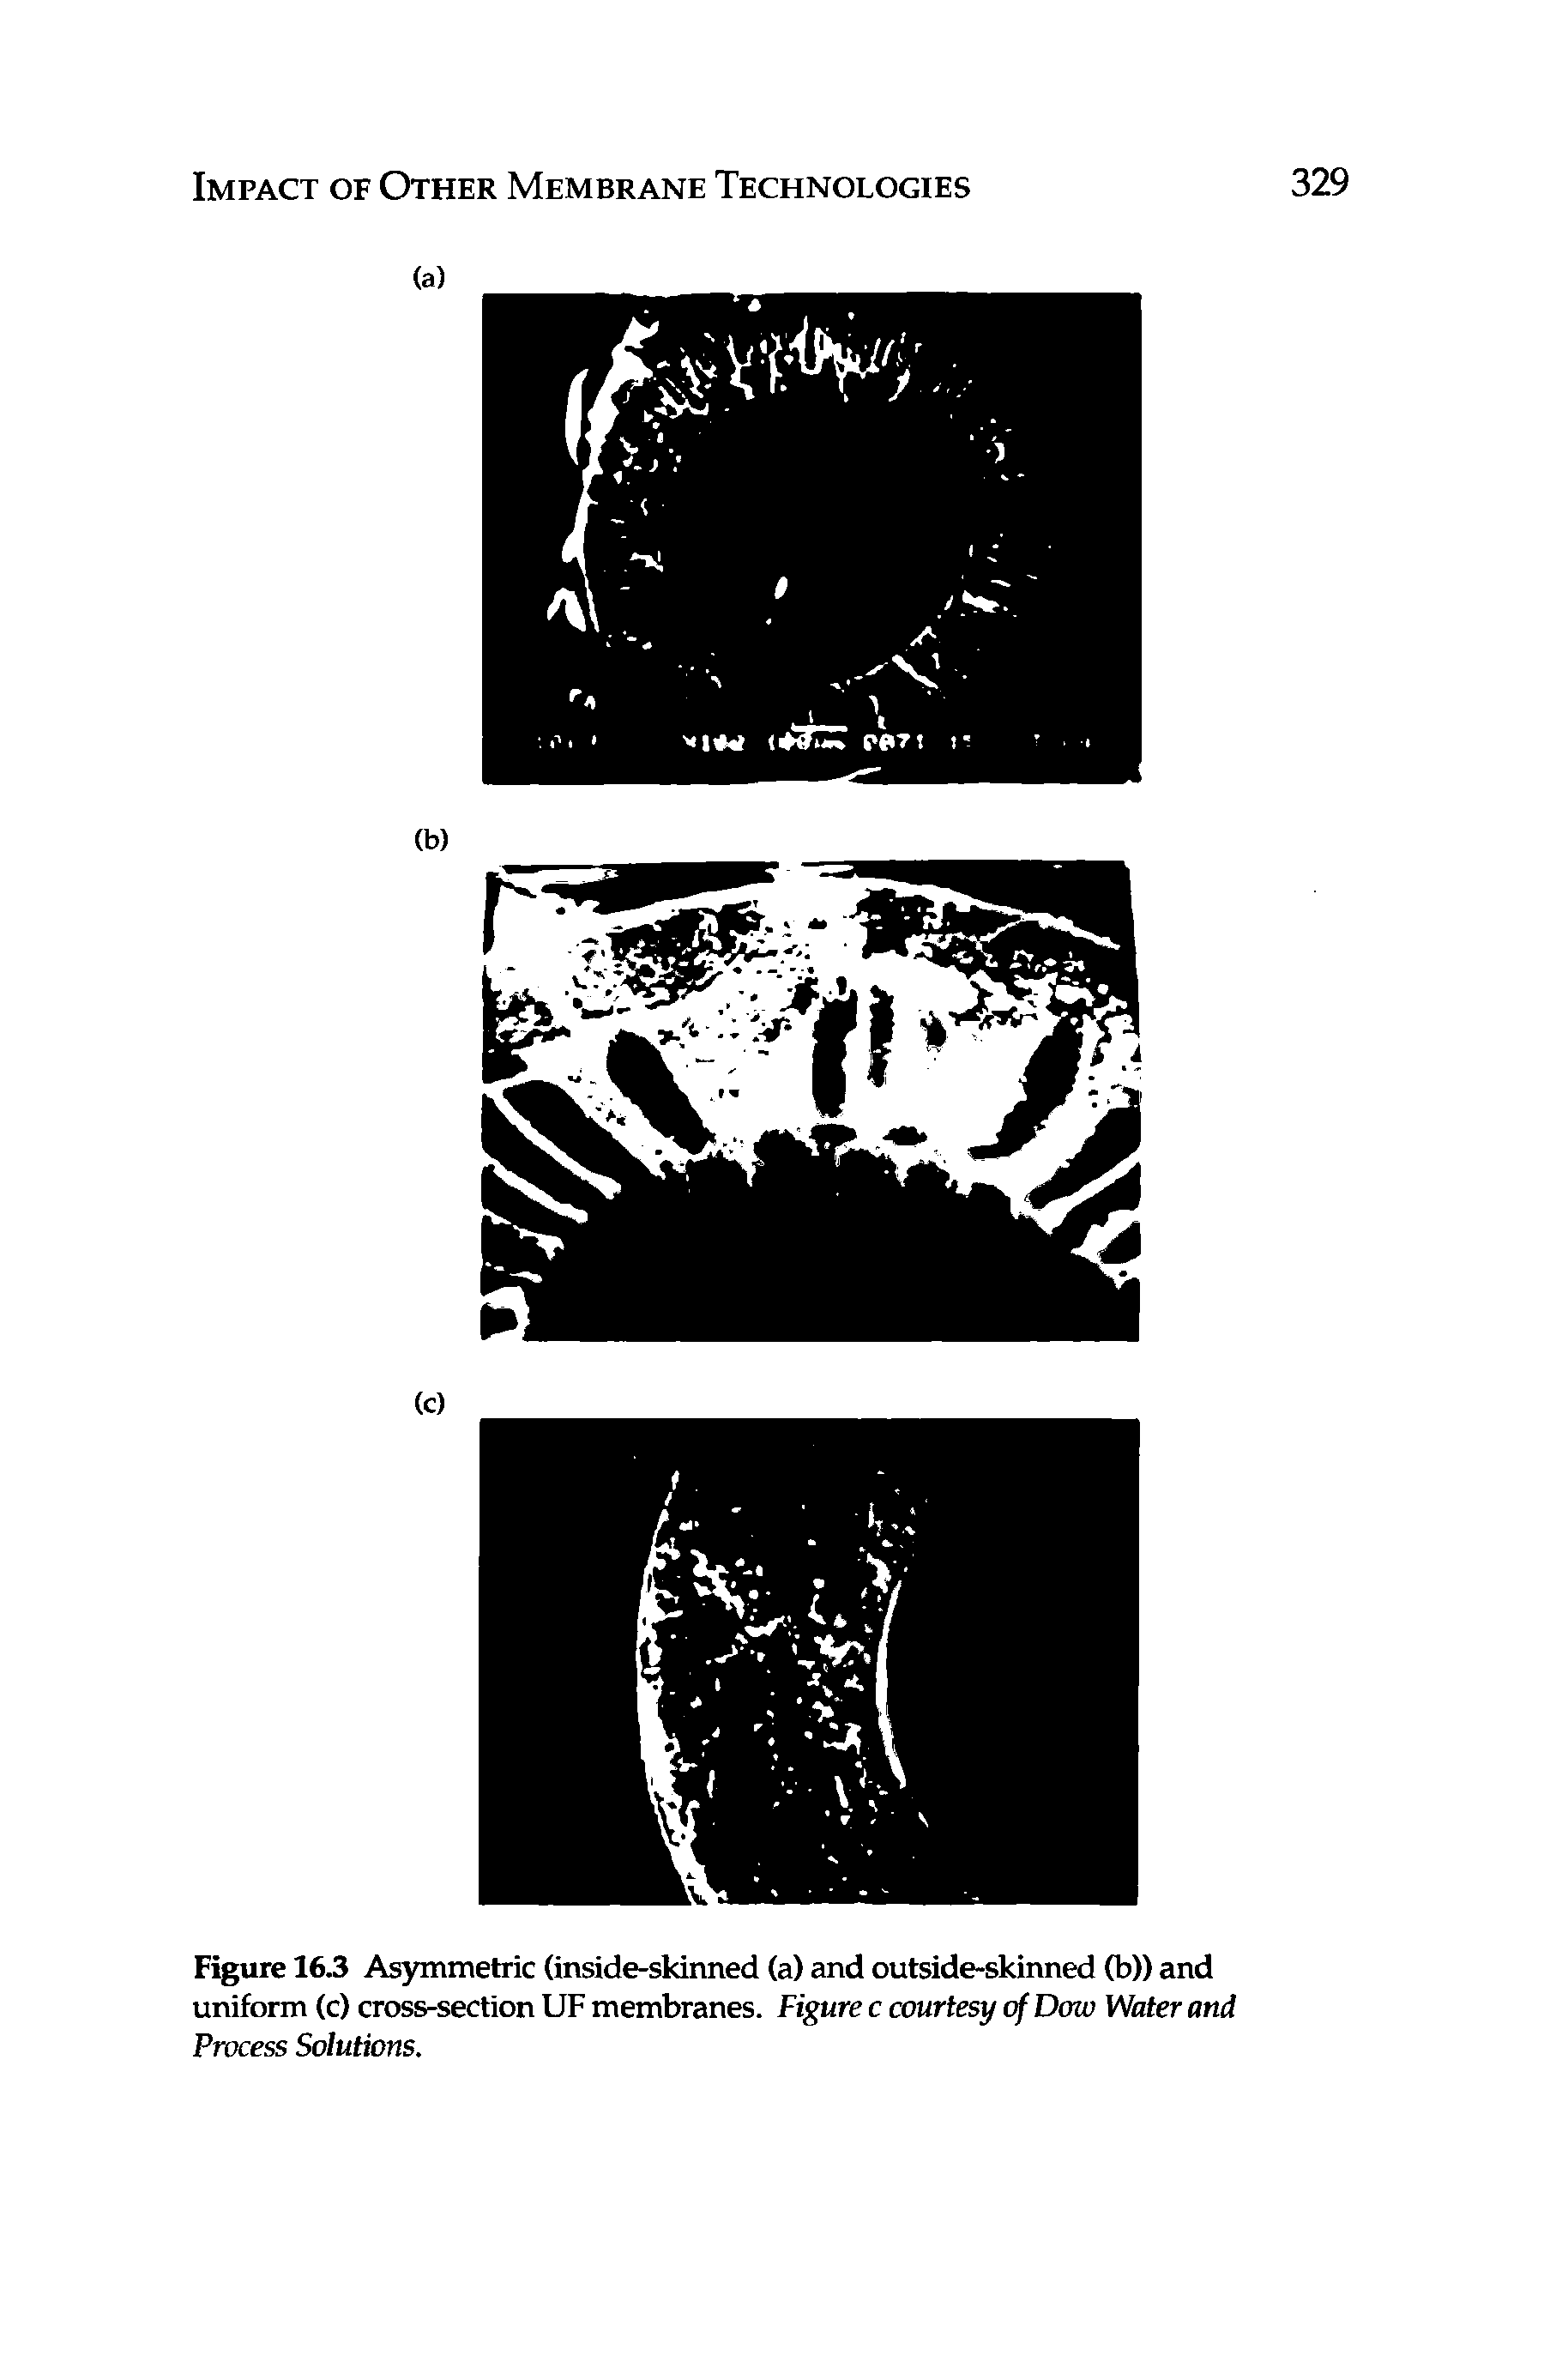 Figure 16.3 Asymmetric (inside-skinned (a) and outside-skinned (b)) and uniform (c) cross-section UF membranes. Figure c courtesy of Dow Water and Process Solutions.